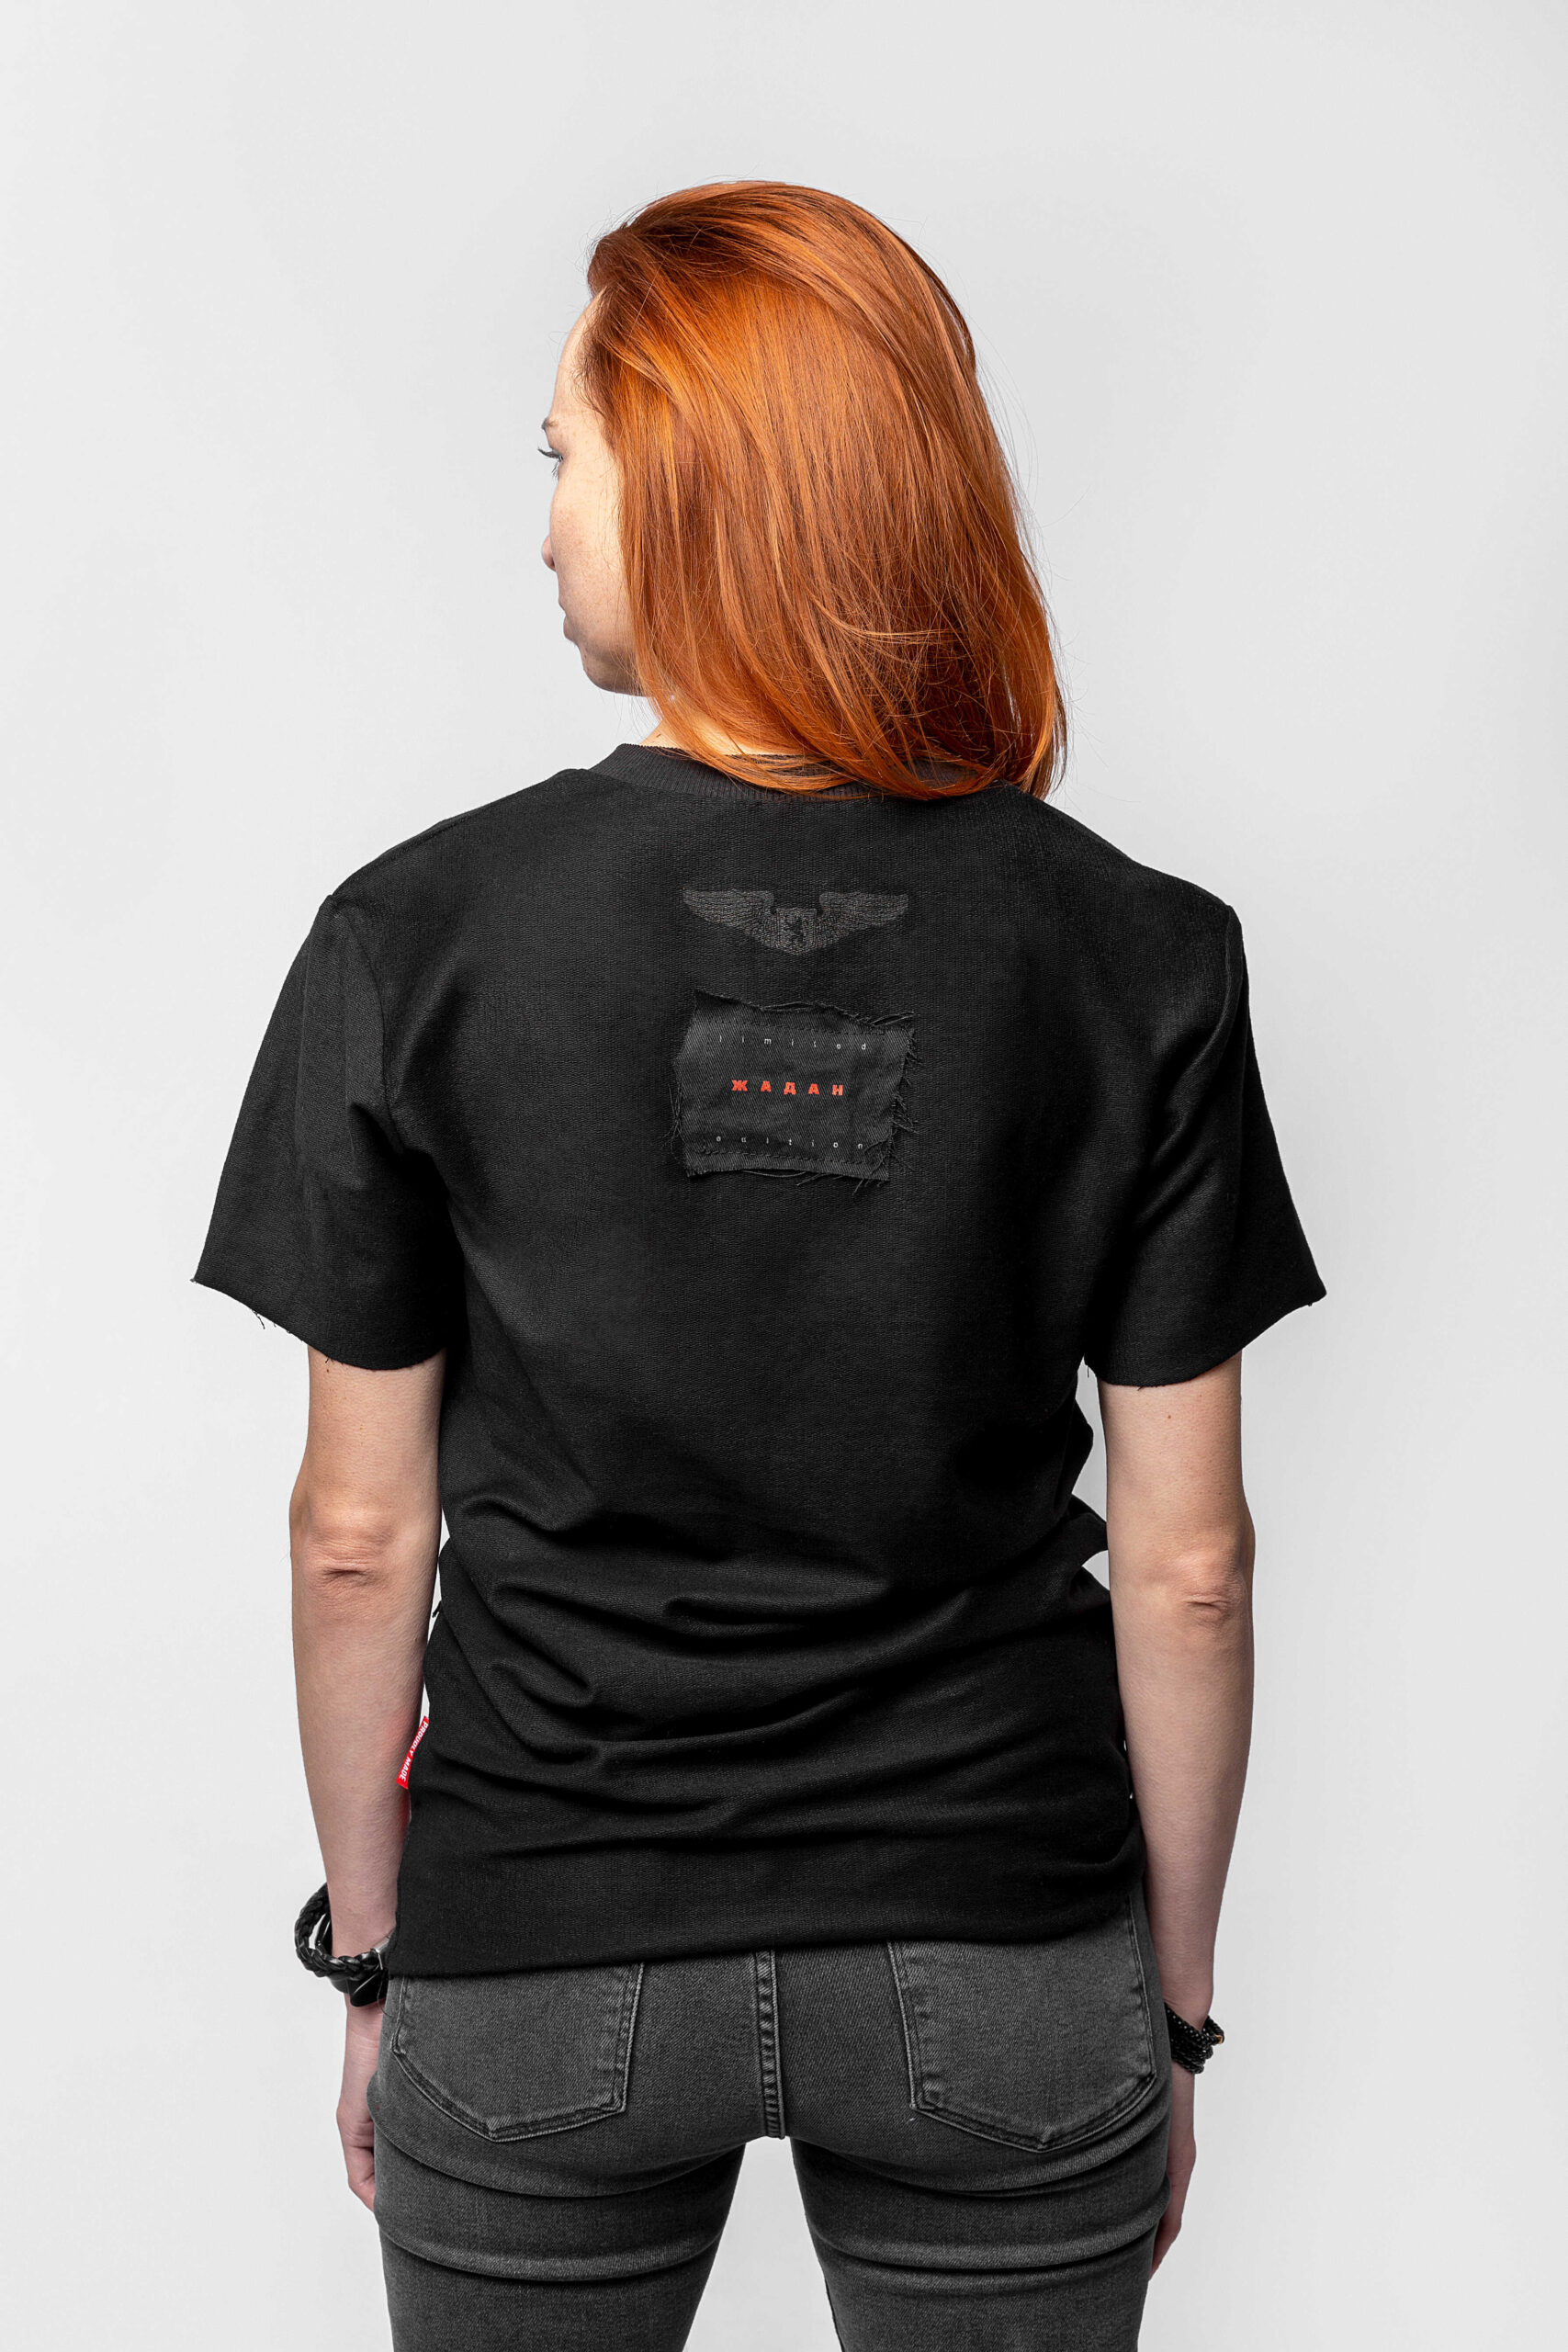 Women T-Shirt Let The Truth Fill The Air. Color black. 1.